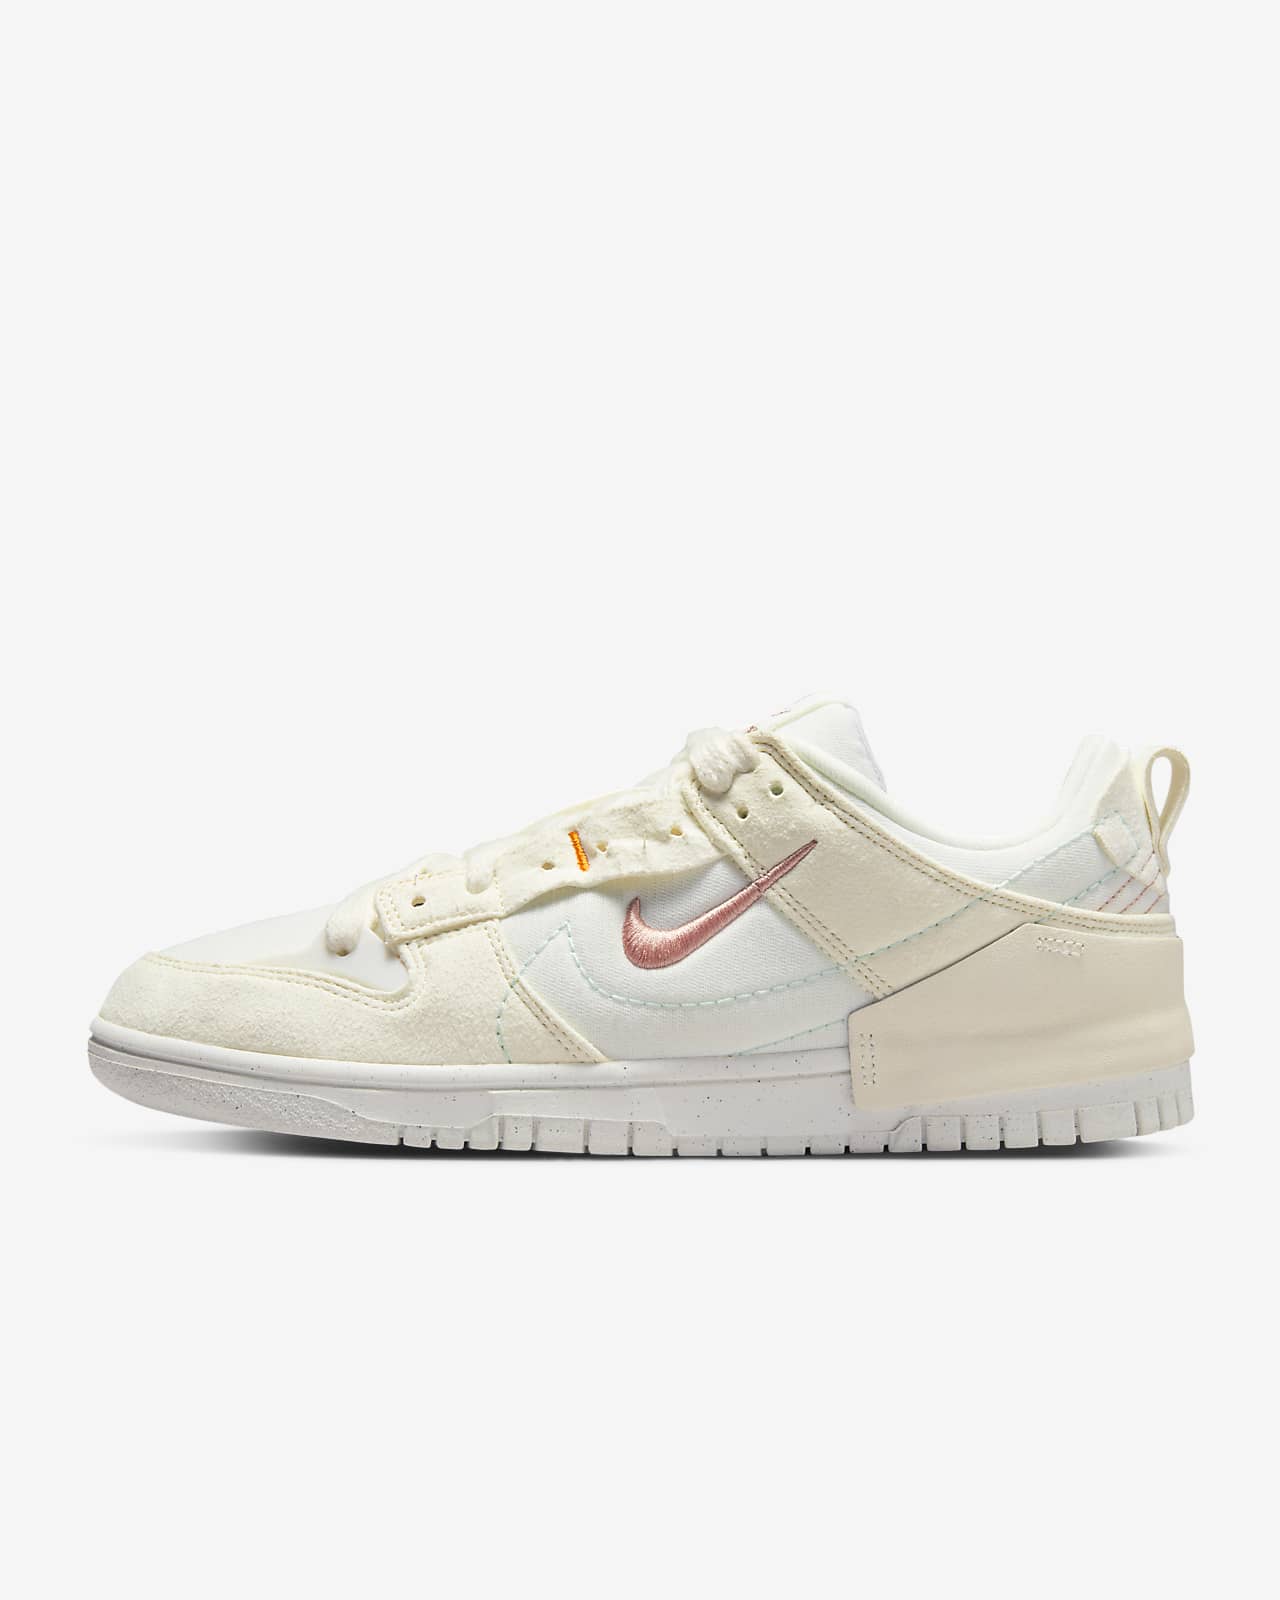 Chaussure Nike Dunk Low Disrupt 2 pour Femme